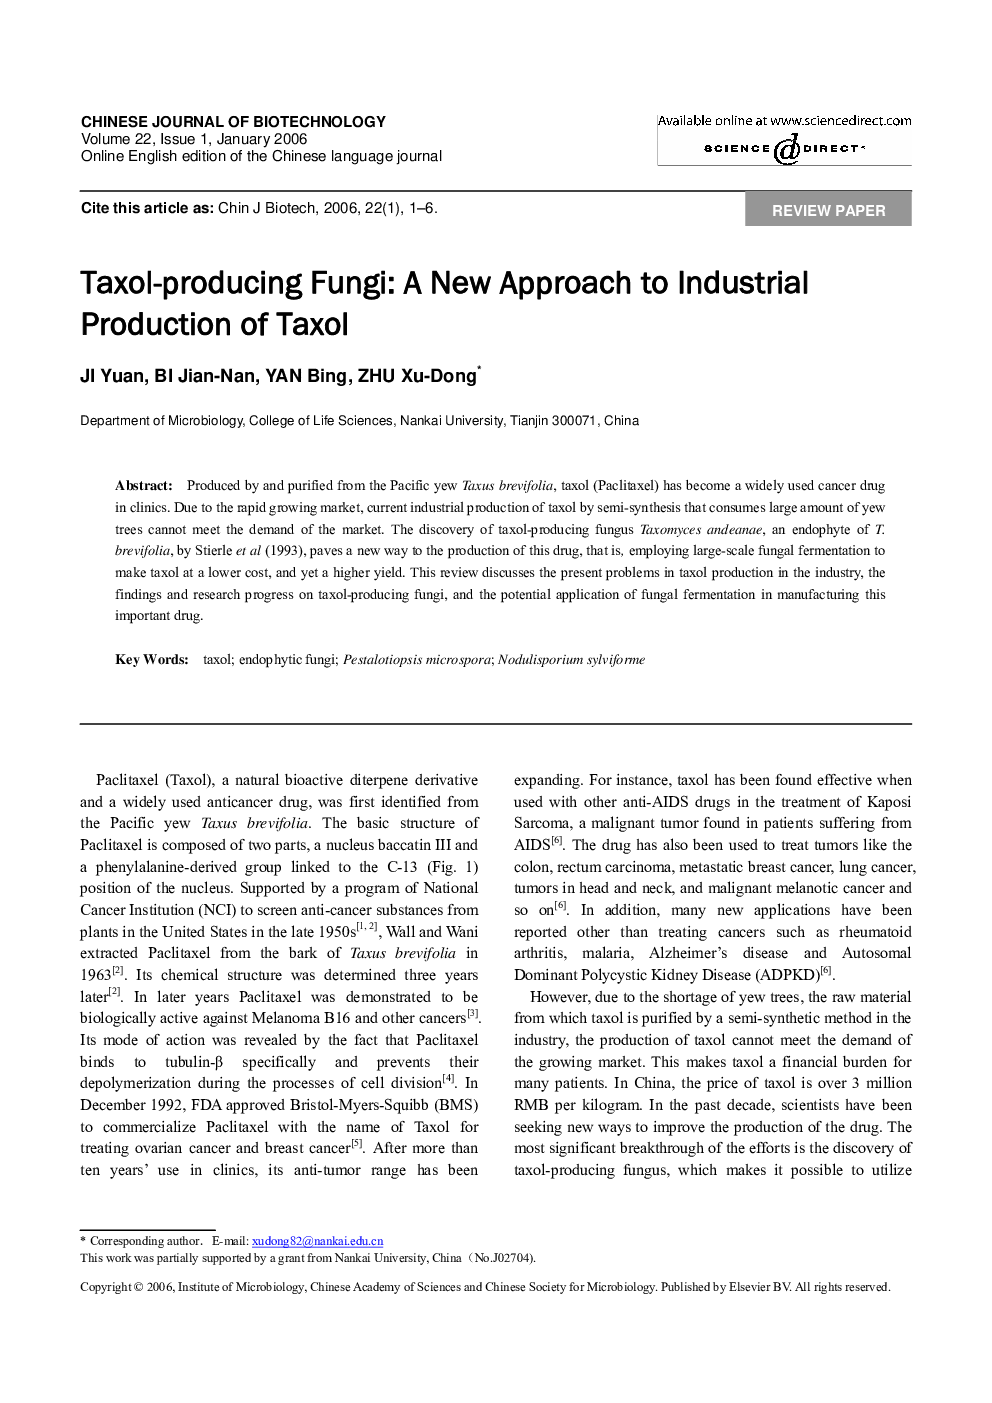 Taxol-producing Fungi: A New Approach to Industrial Production of Taxol